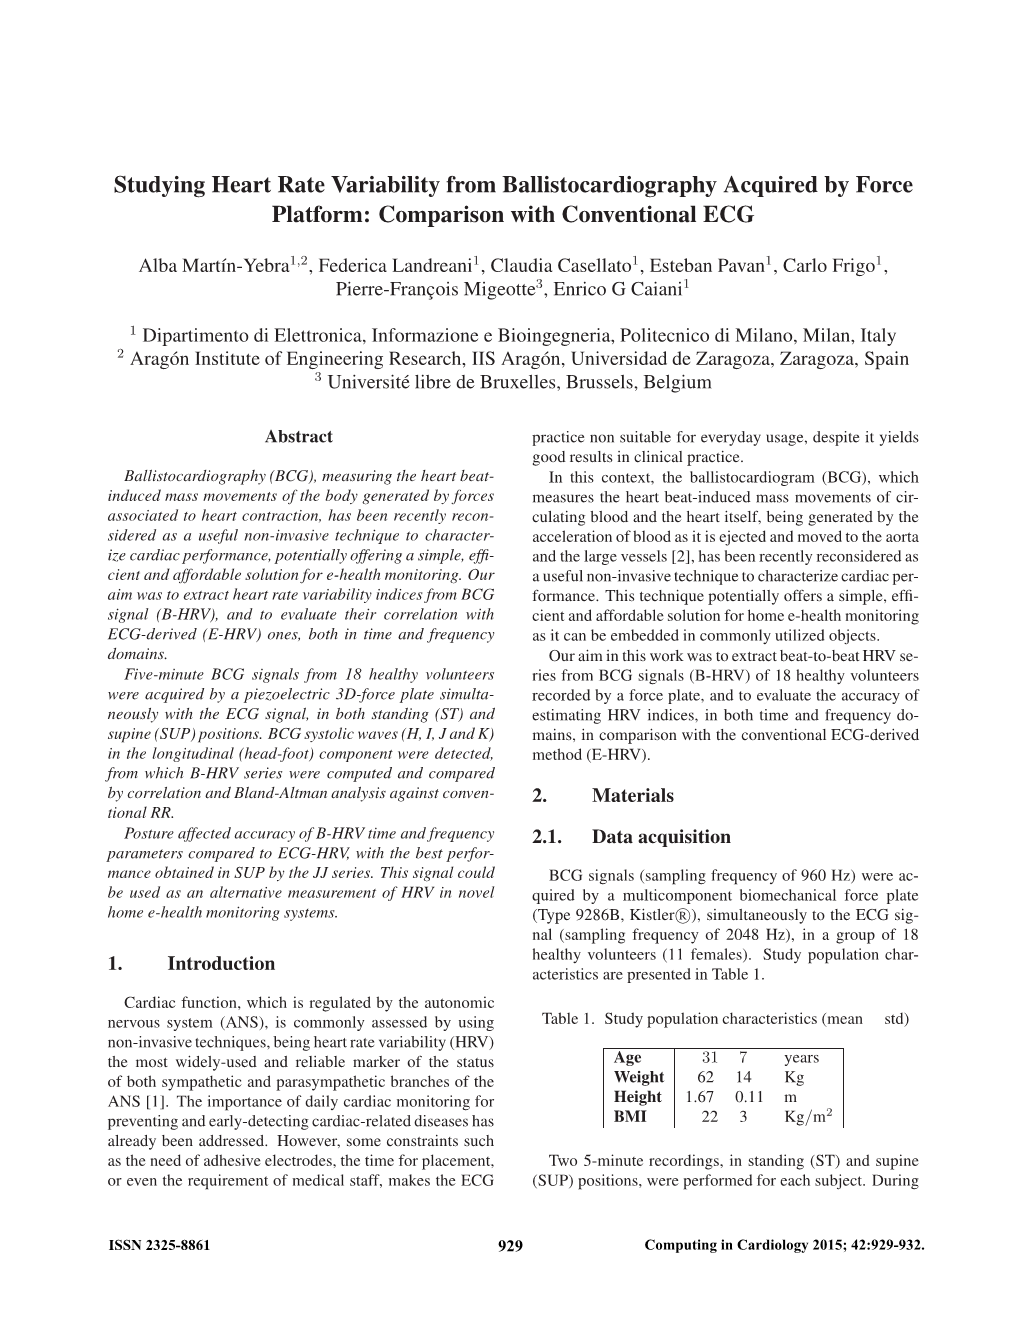 Studying Heart Rate Variability from Ballistocardiography Acquired by Force Platform: Comparison with Conventional ECG